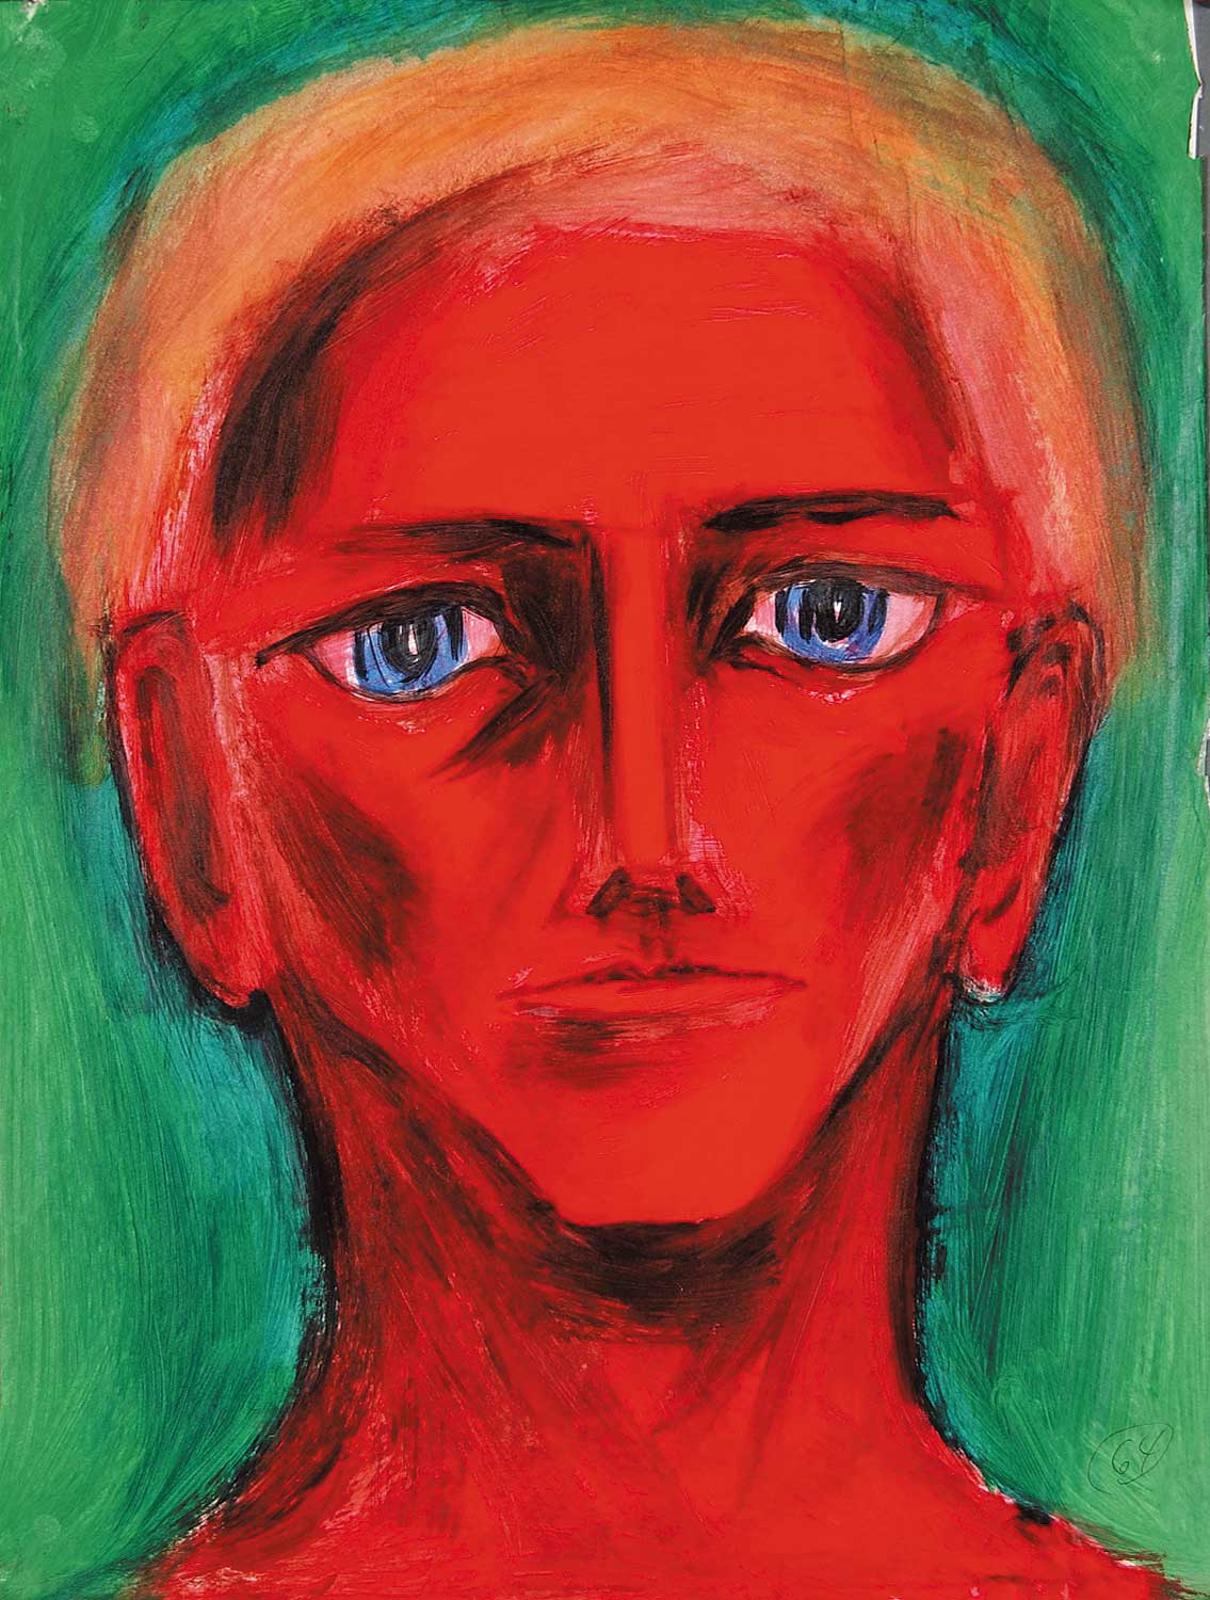 Robert Charles Aller (1922-2008) - Untitled - Portrait of Red Man on Green Background